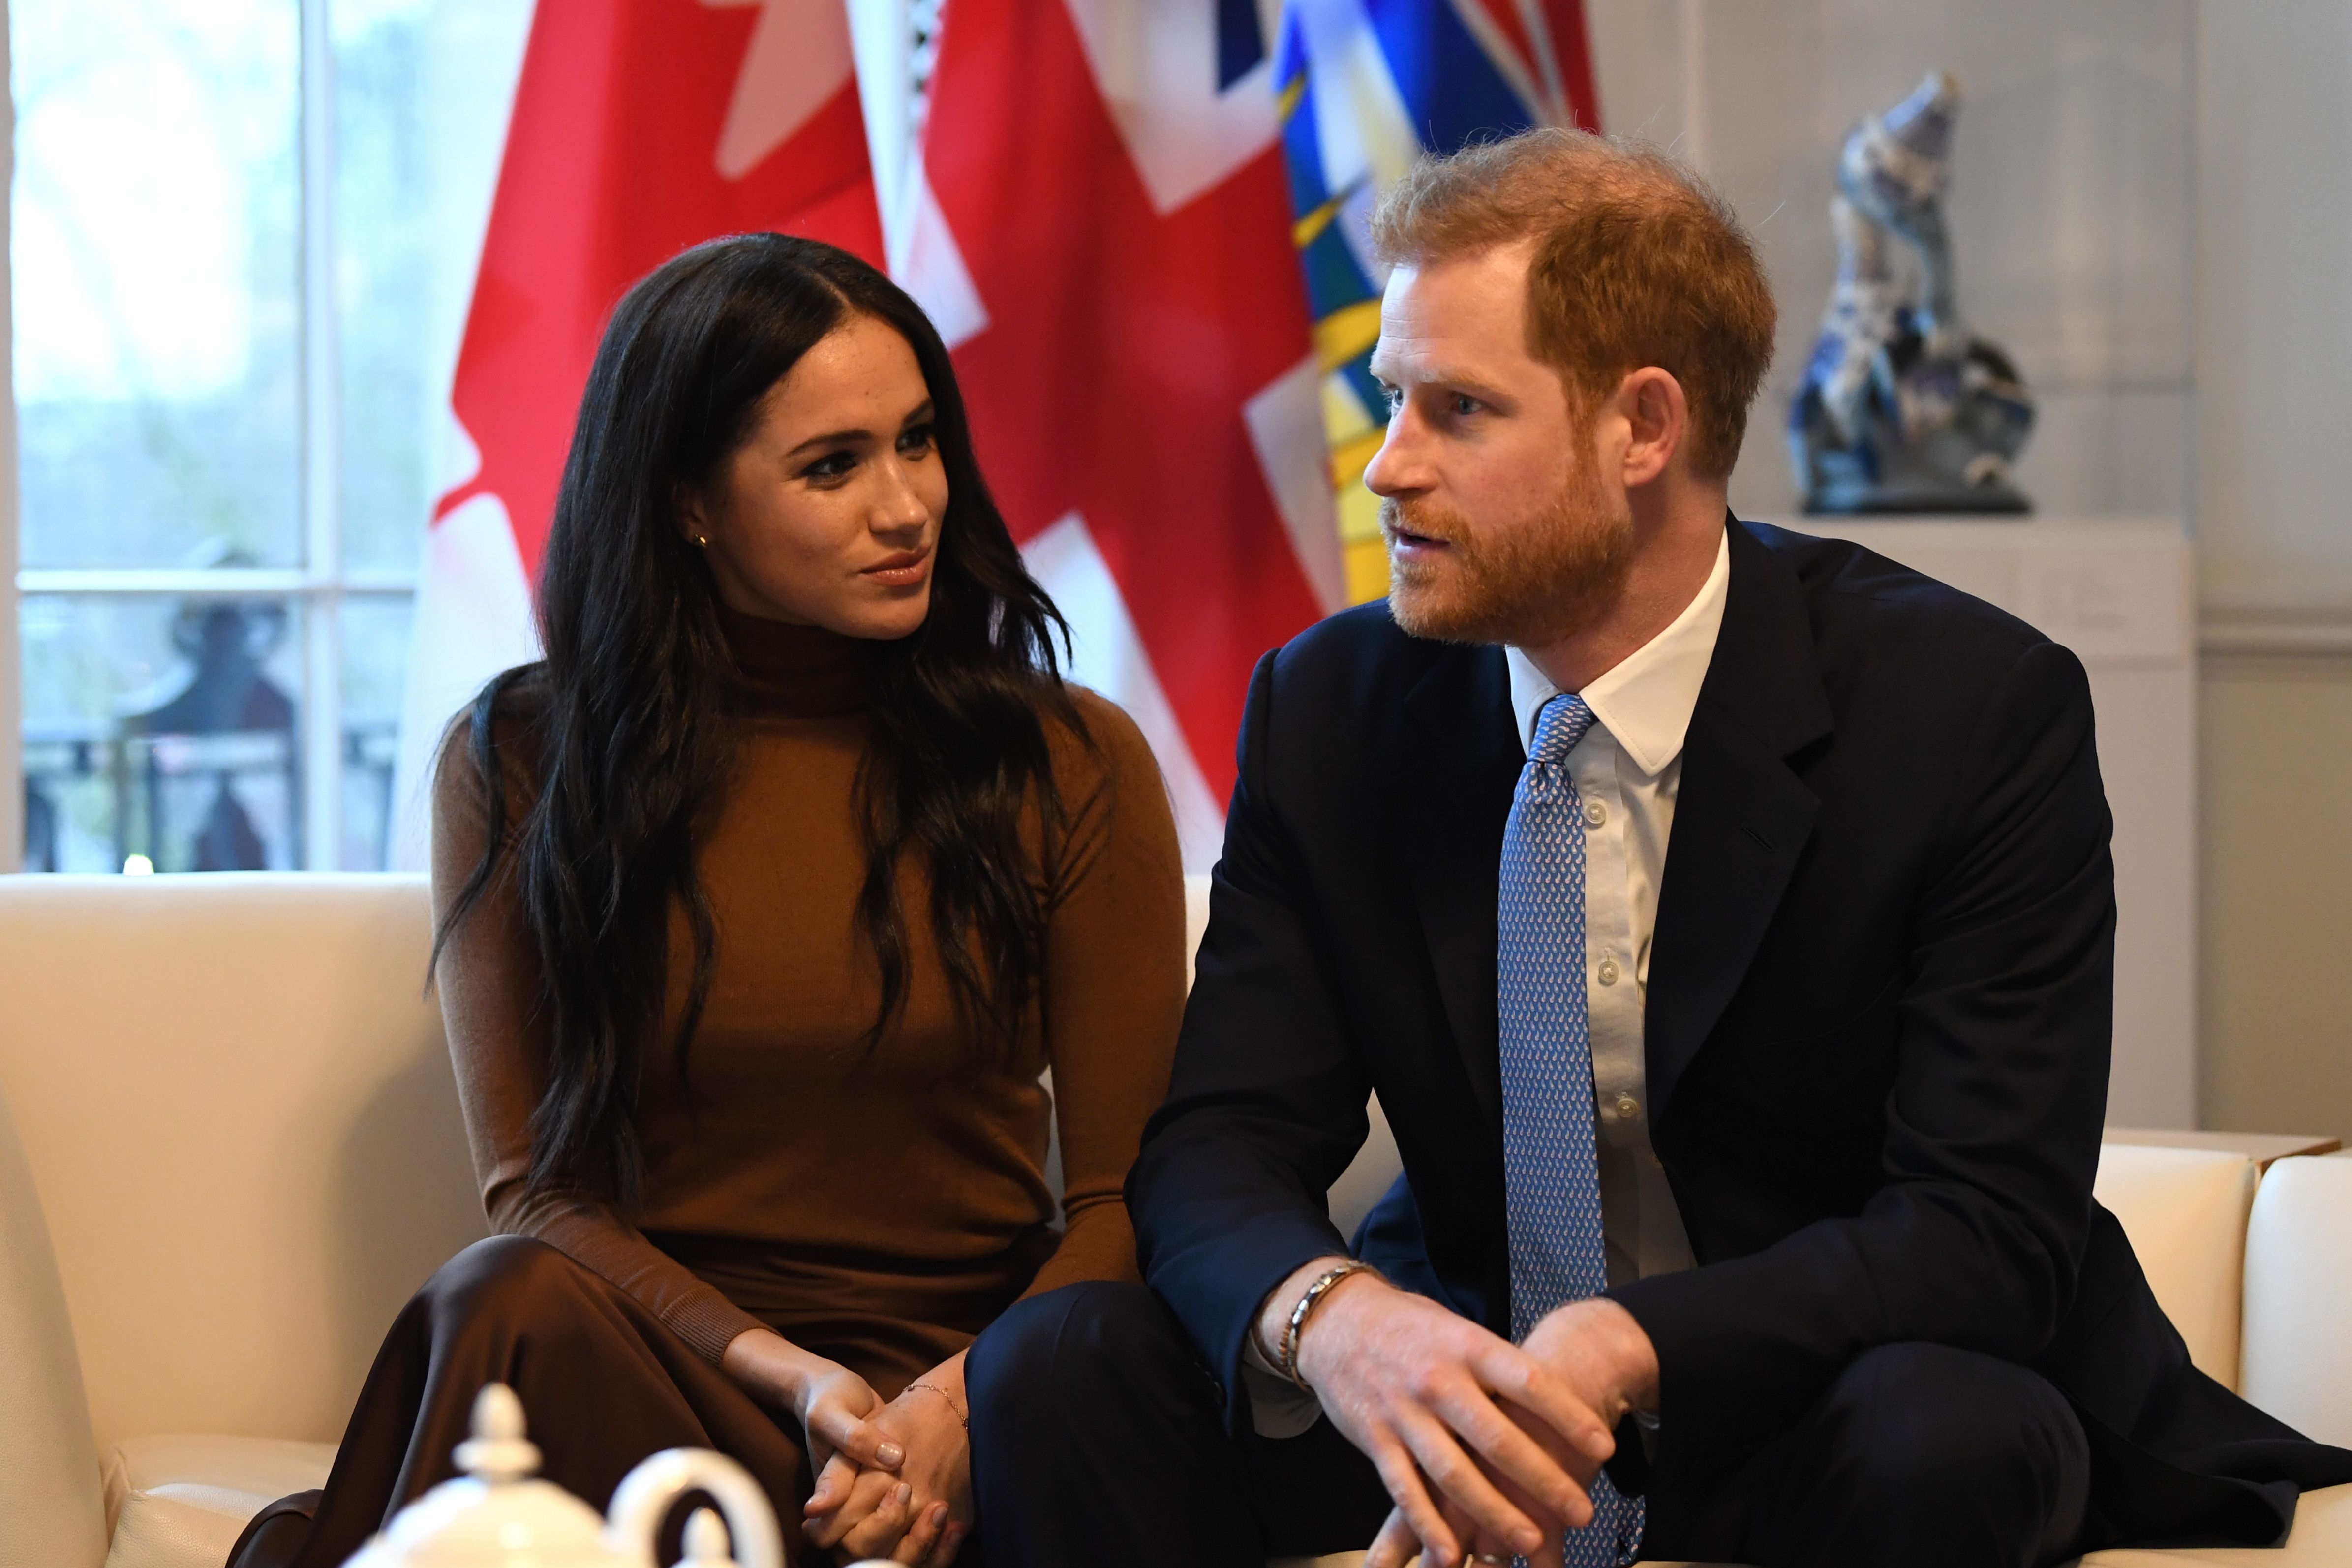 Prince Harry and Meghan during their visit to Canada House on January 7, 2020 | Photo: Getty Images